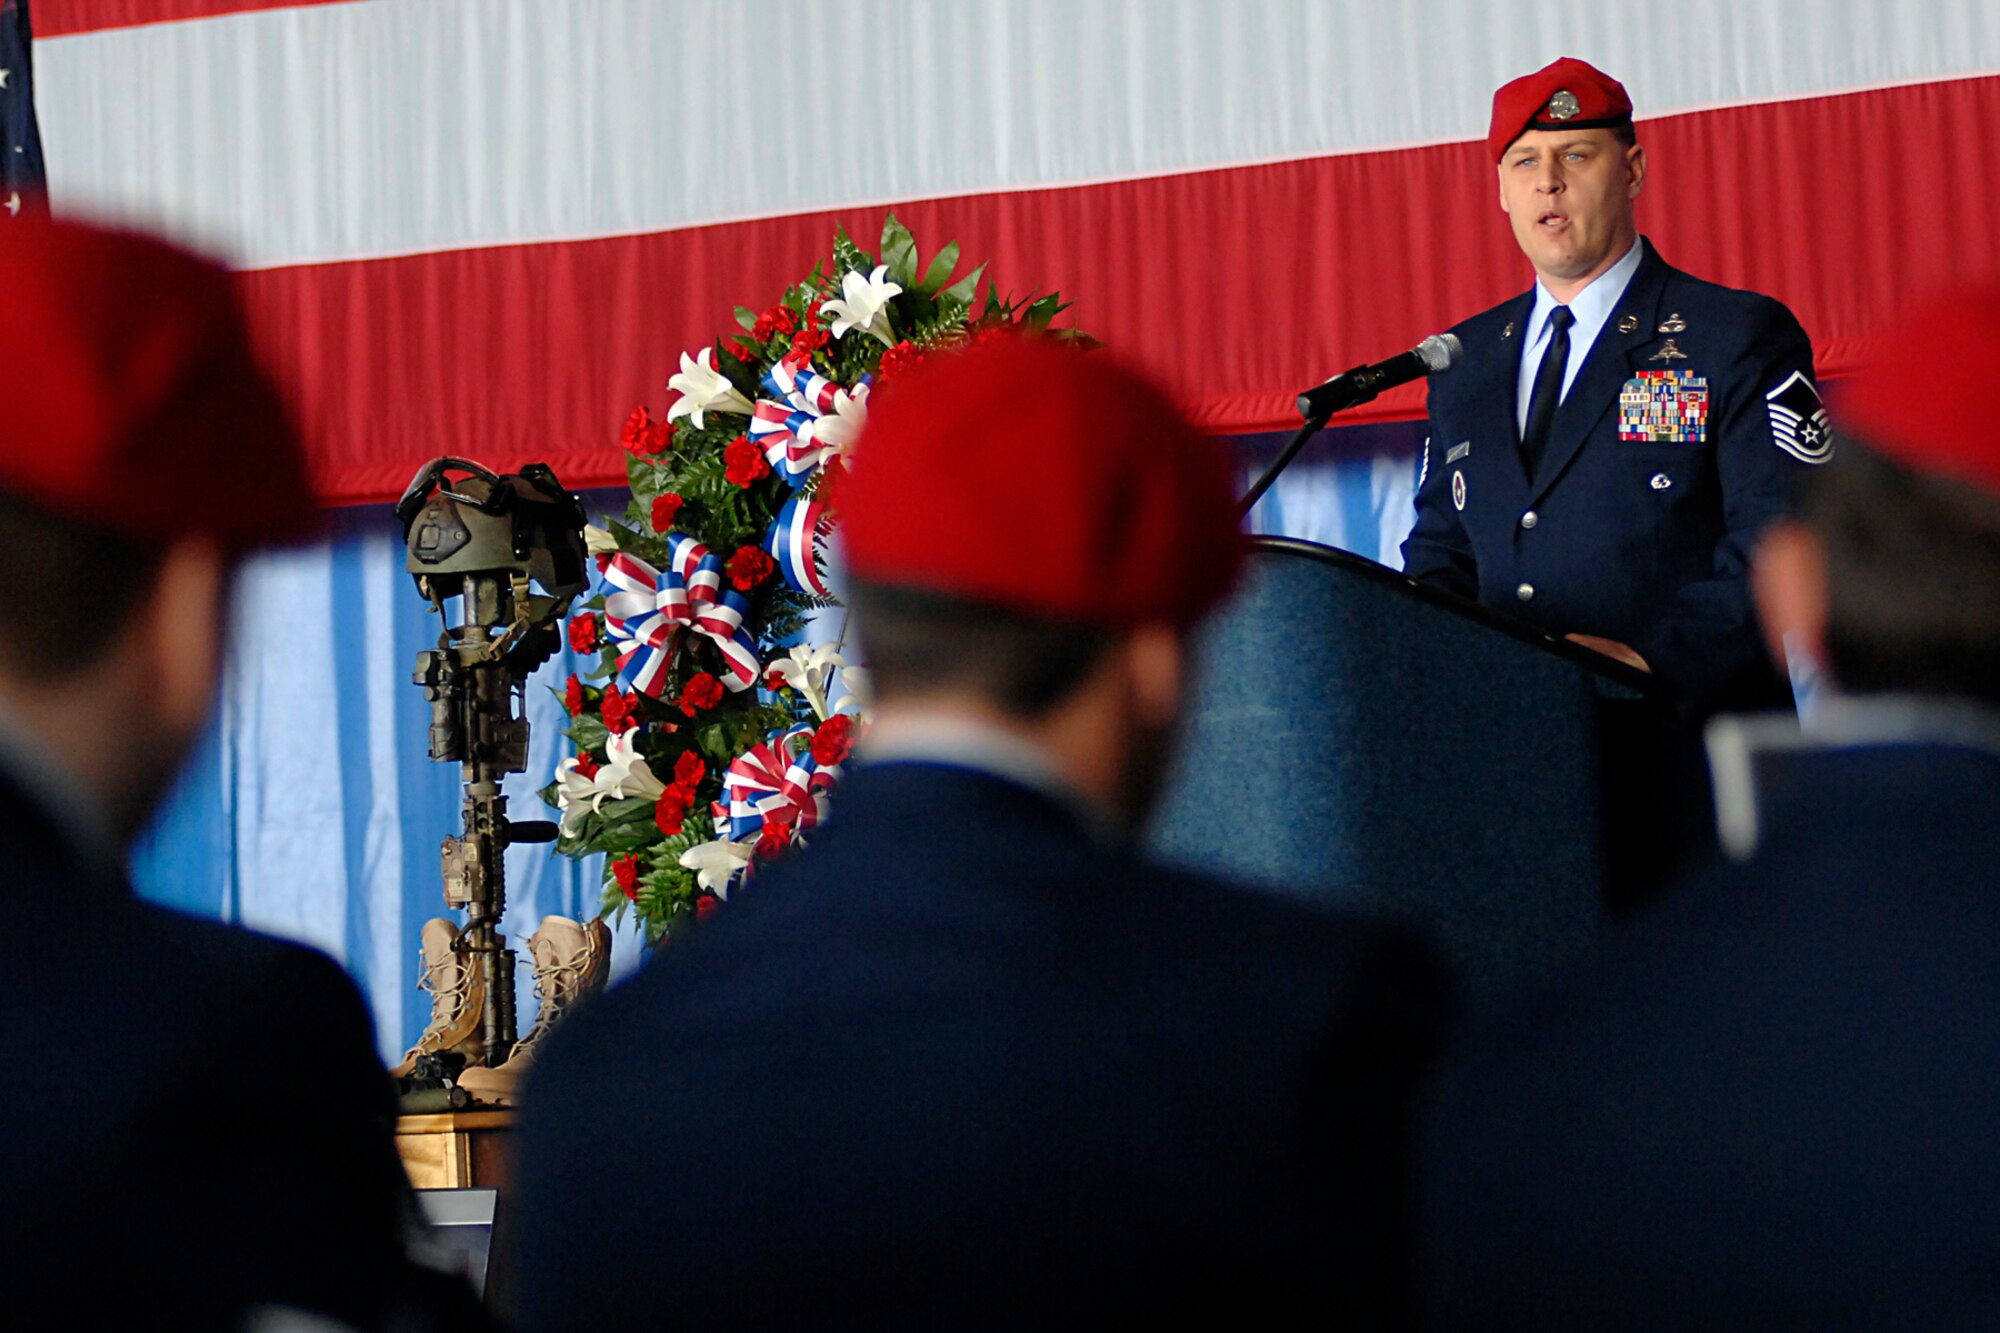 Master Sgt. Bill Adams speaks during the memorial ceremony for Tech. Sgt. William Jefferson Jr., 21st Special Tactics Squadron, at Hangar 4 on Pope Air Force Base March 26. Sergeant Jefferson died in support of Operation Enduring Freedom March 22. (U.S. Air Force Photo by Mike Murchison)